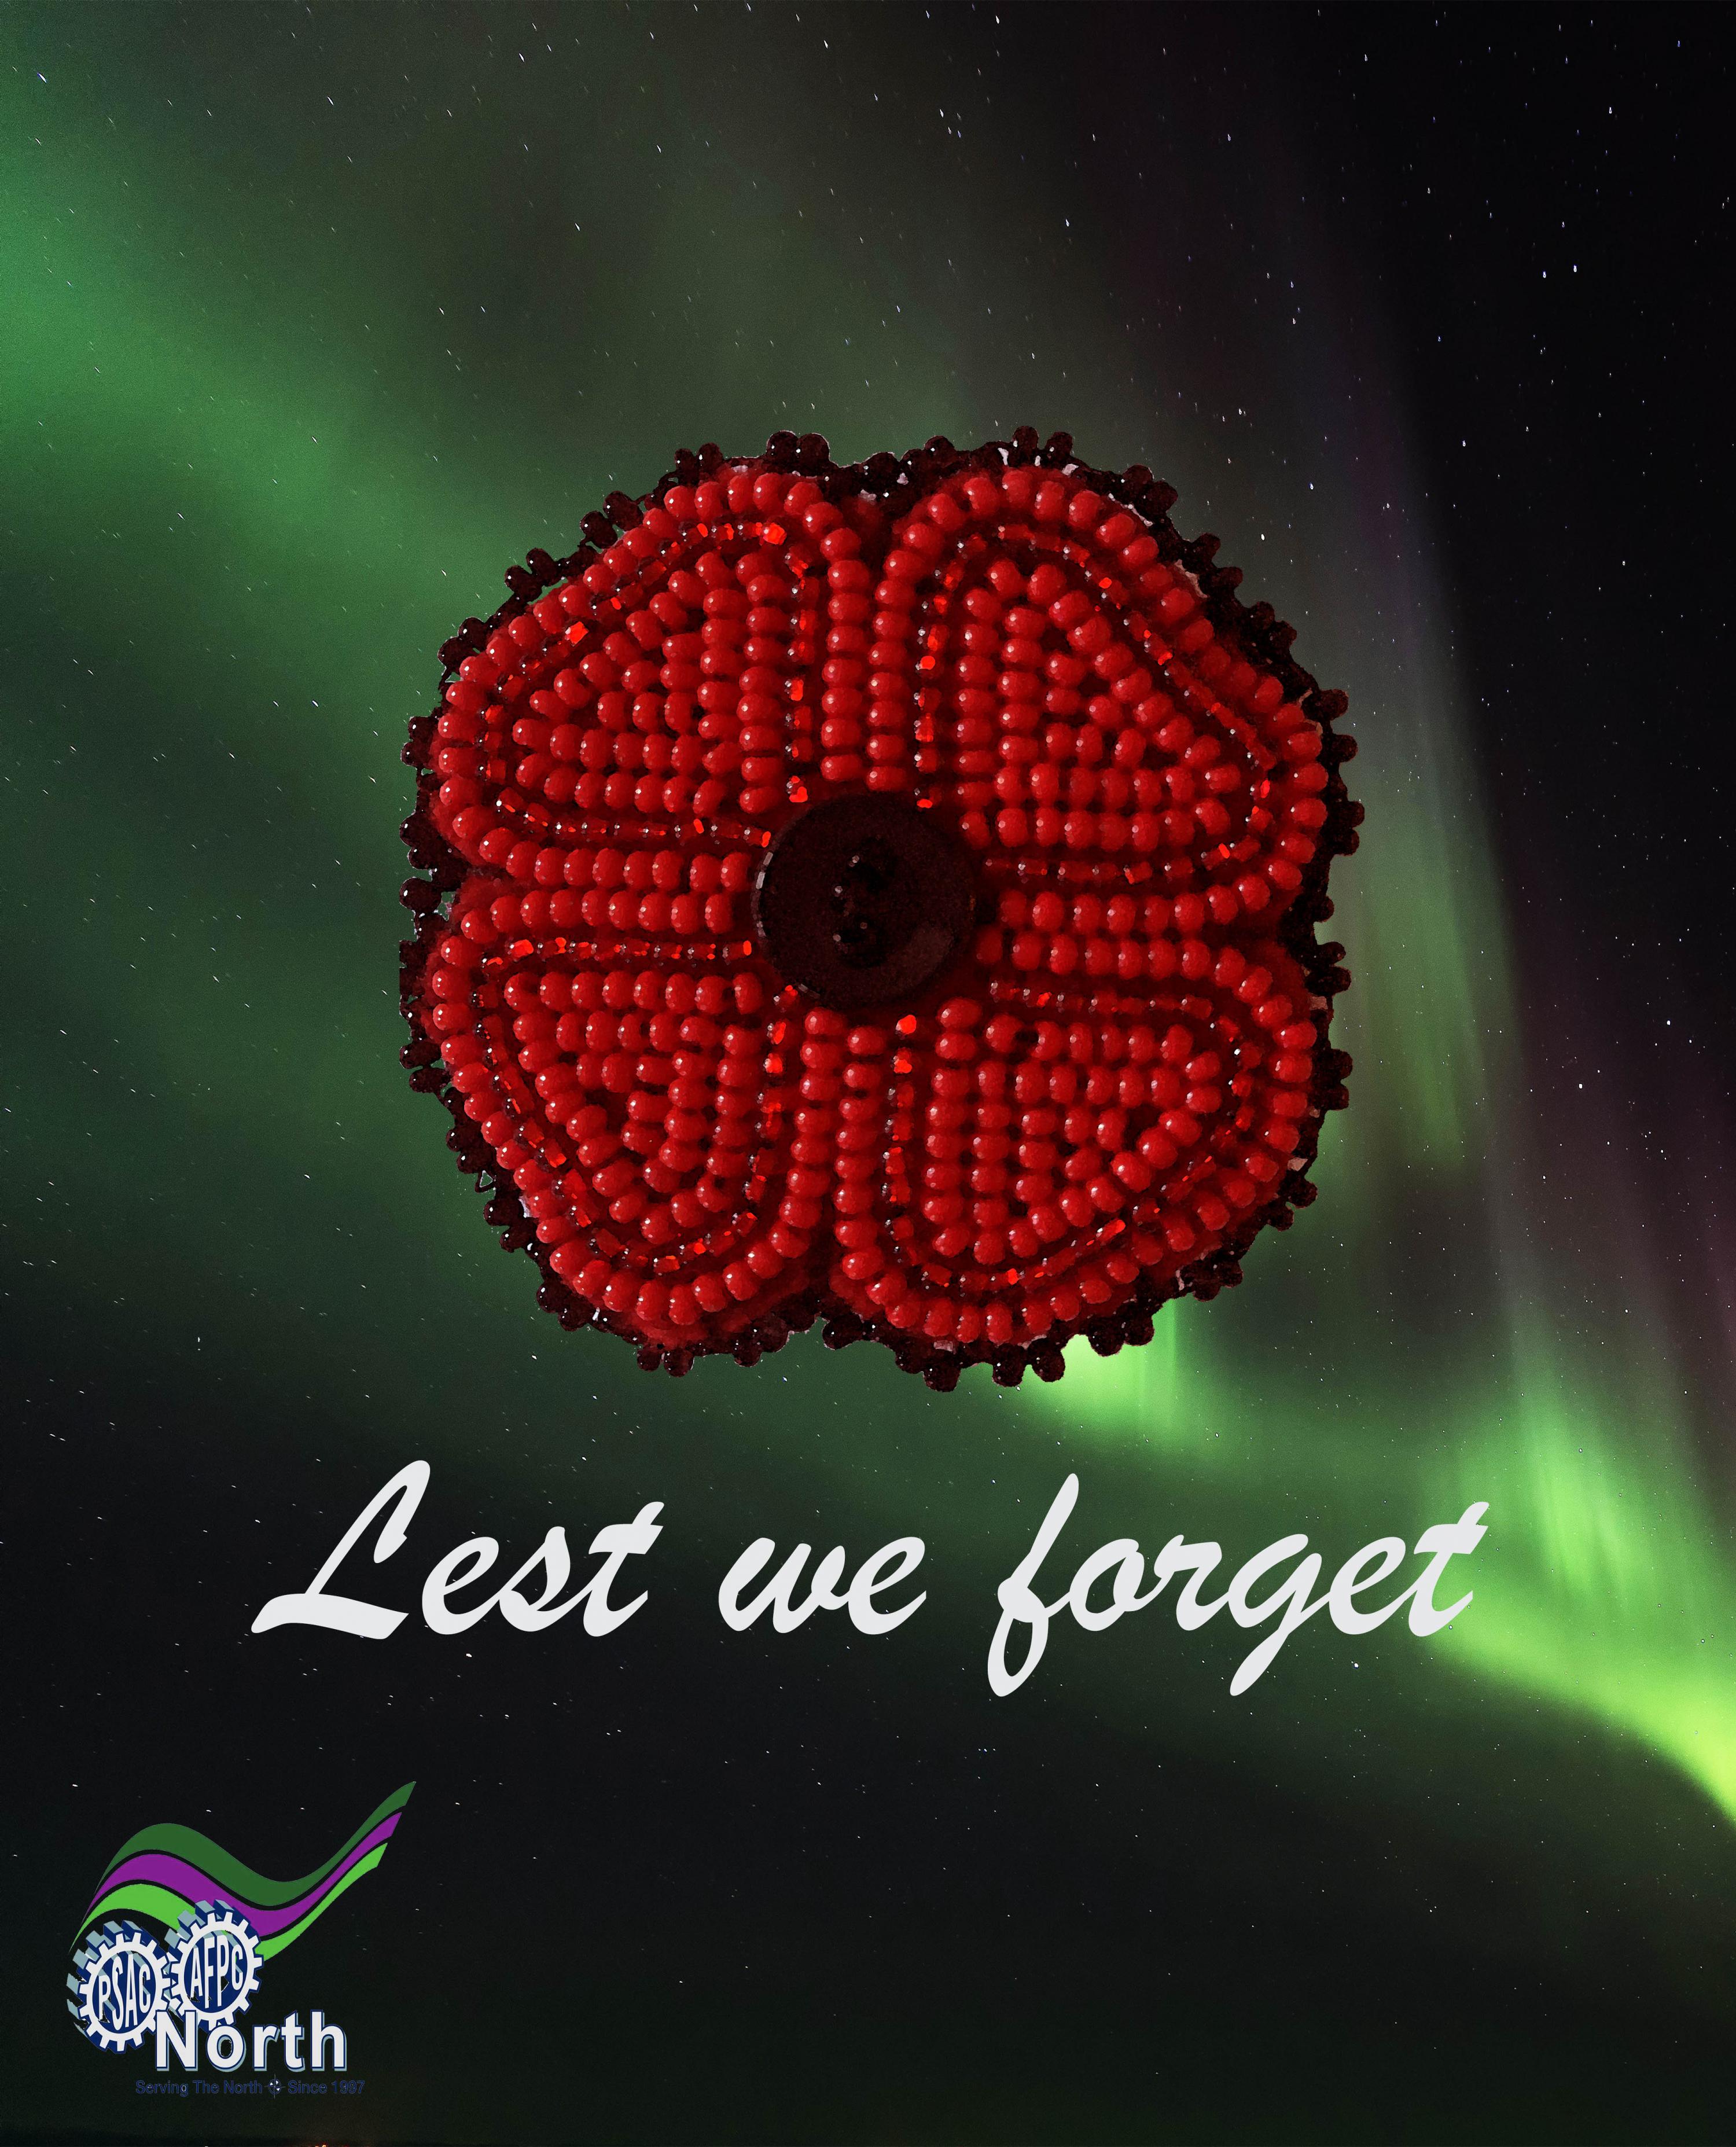 Beaded red poppy, lest we forget 